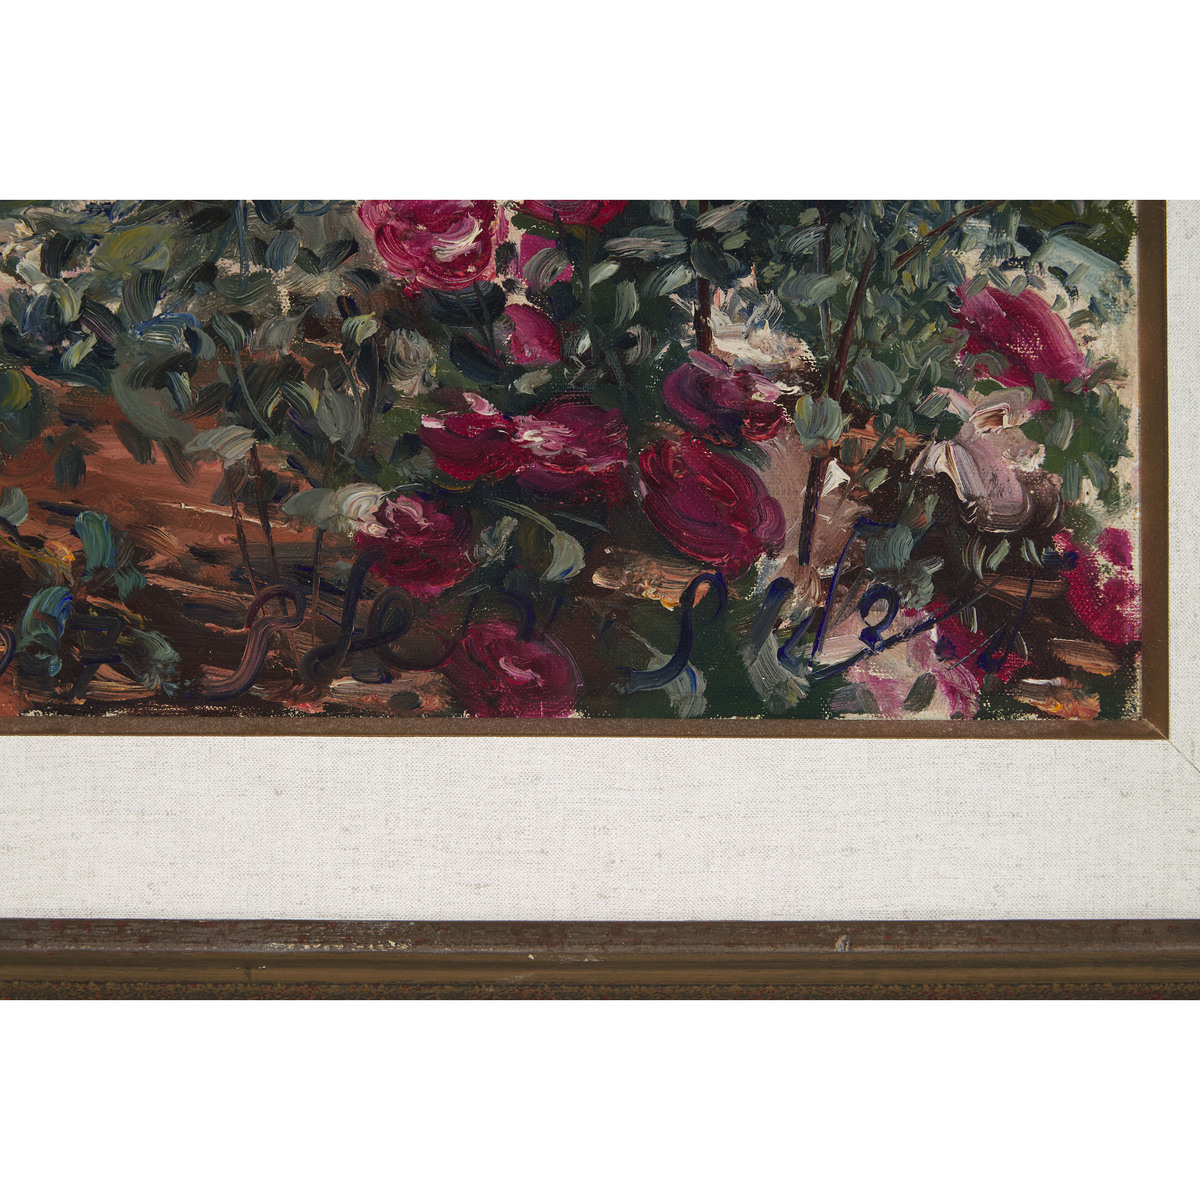 Ludwig Blum (1891-1974), ROSE GARDEN, 1937, signed, dated, and situated "Jerusalem" lower left, 29 x - Image 4 of 6